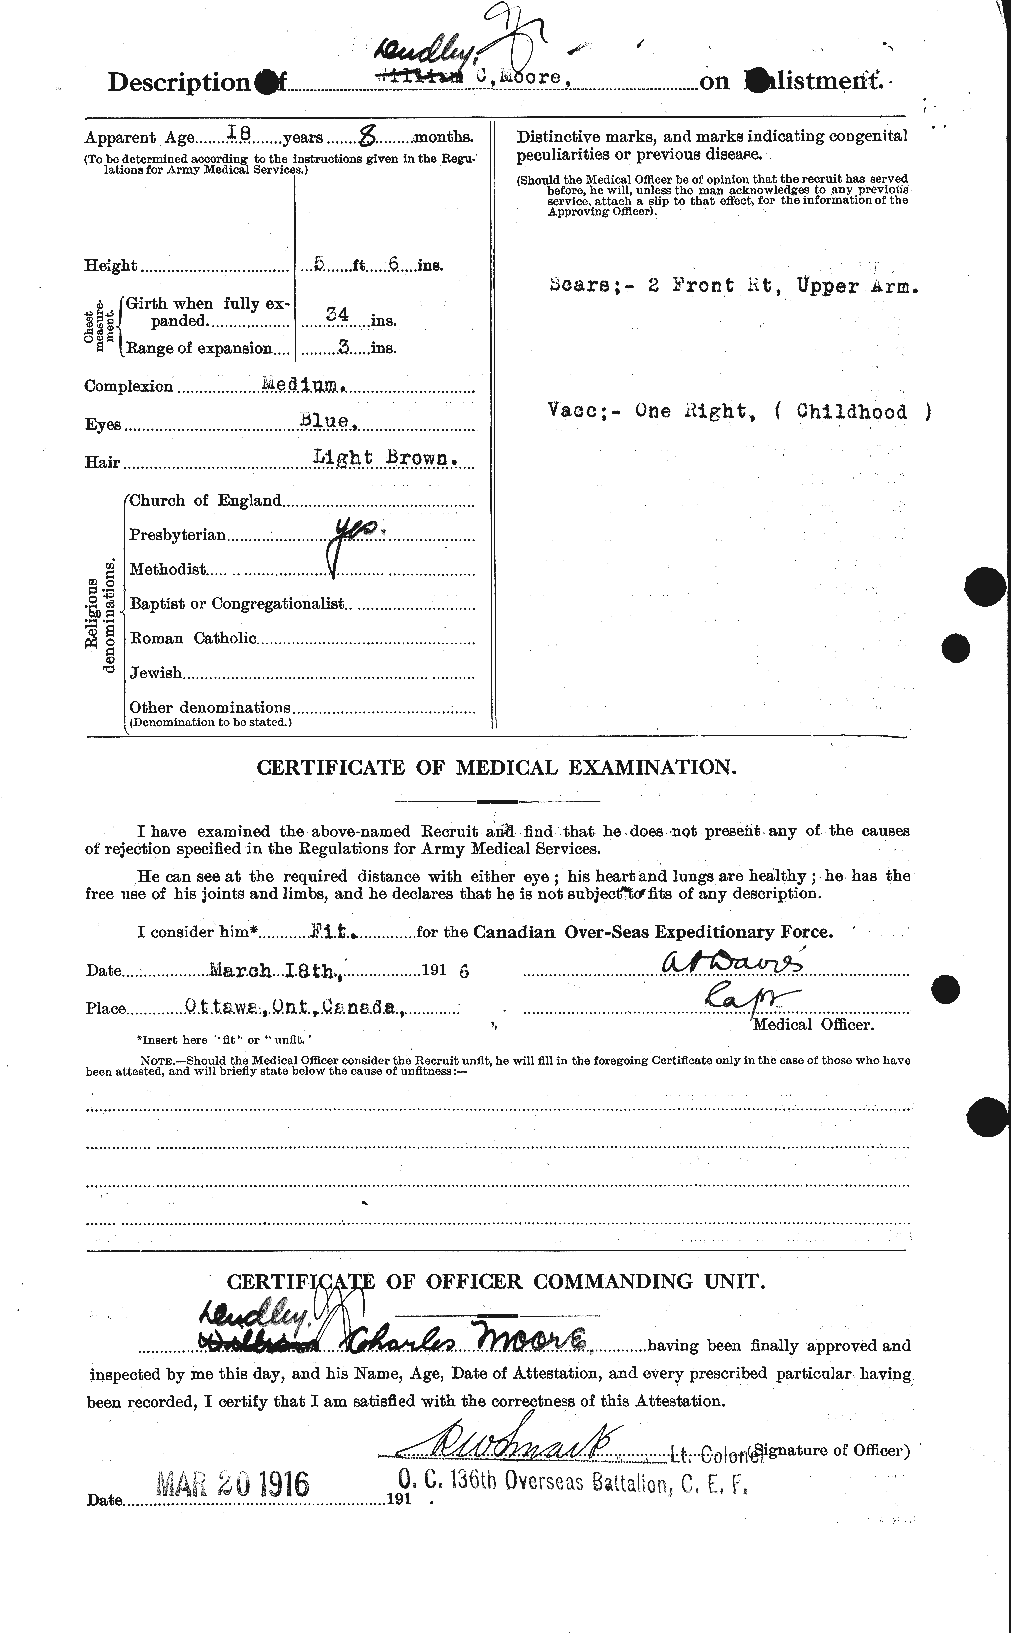 Personnel Records of the First World War - CEF 200477b